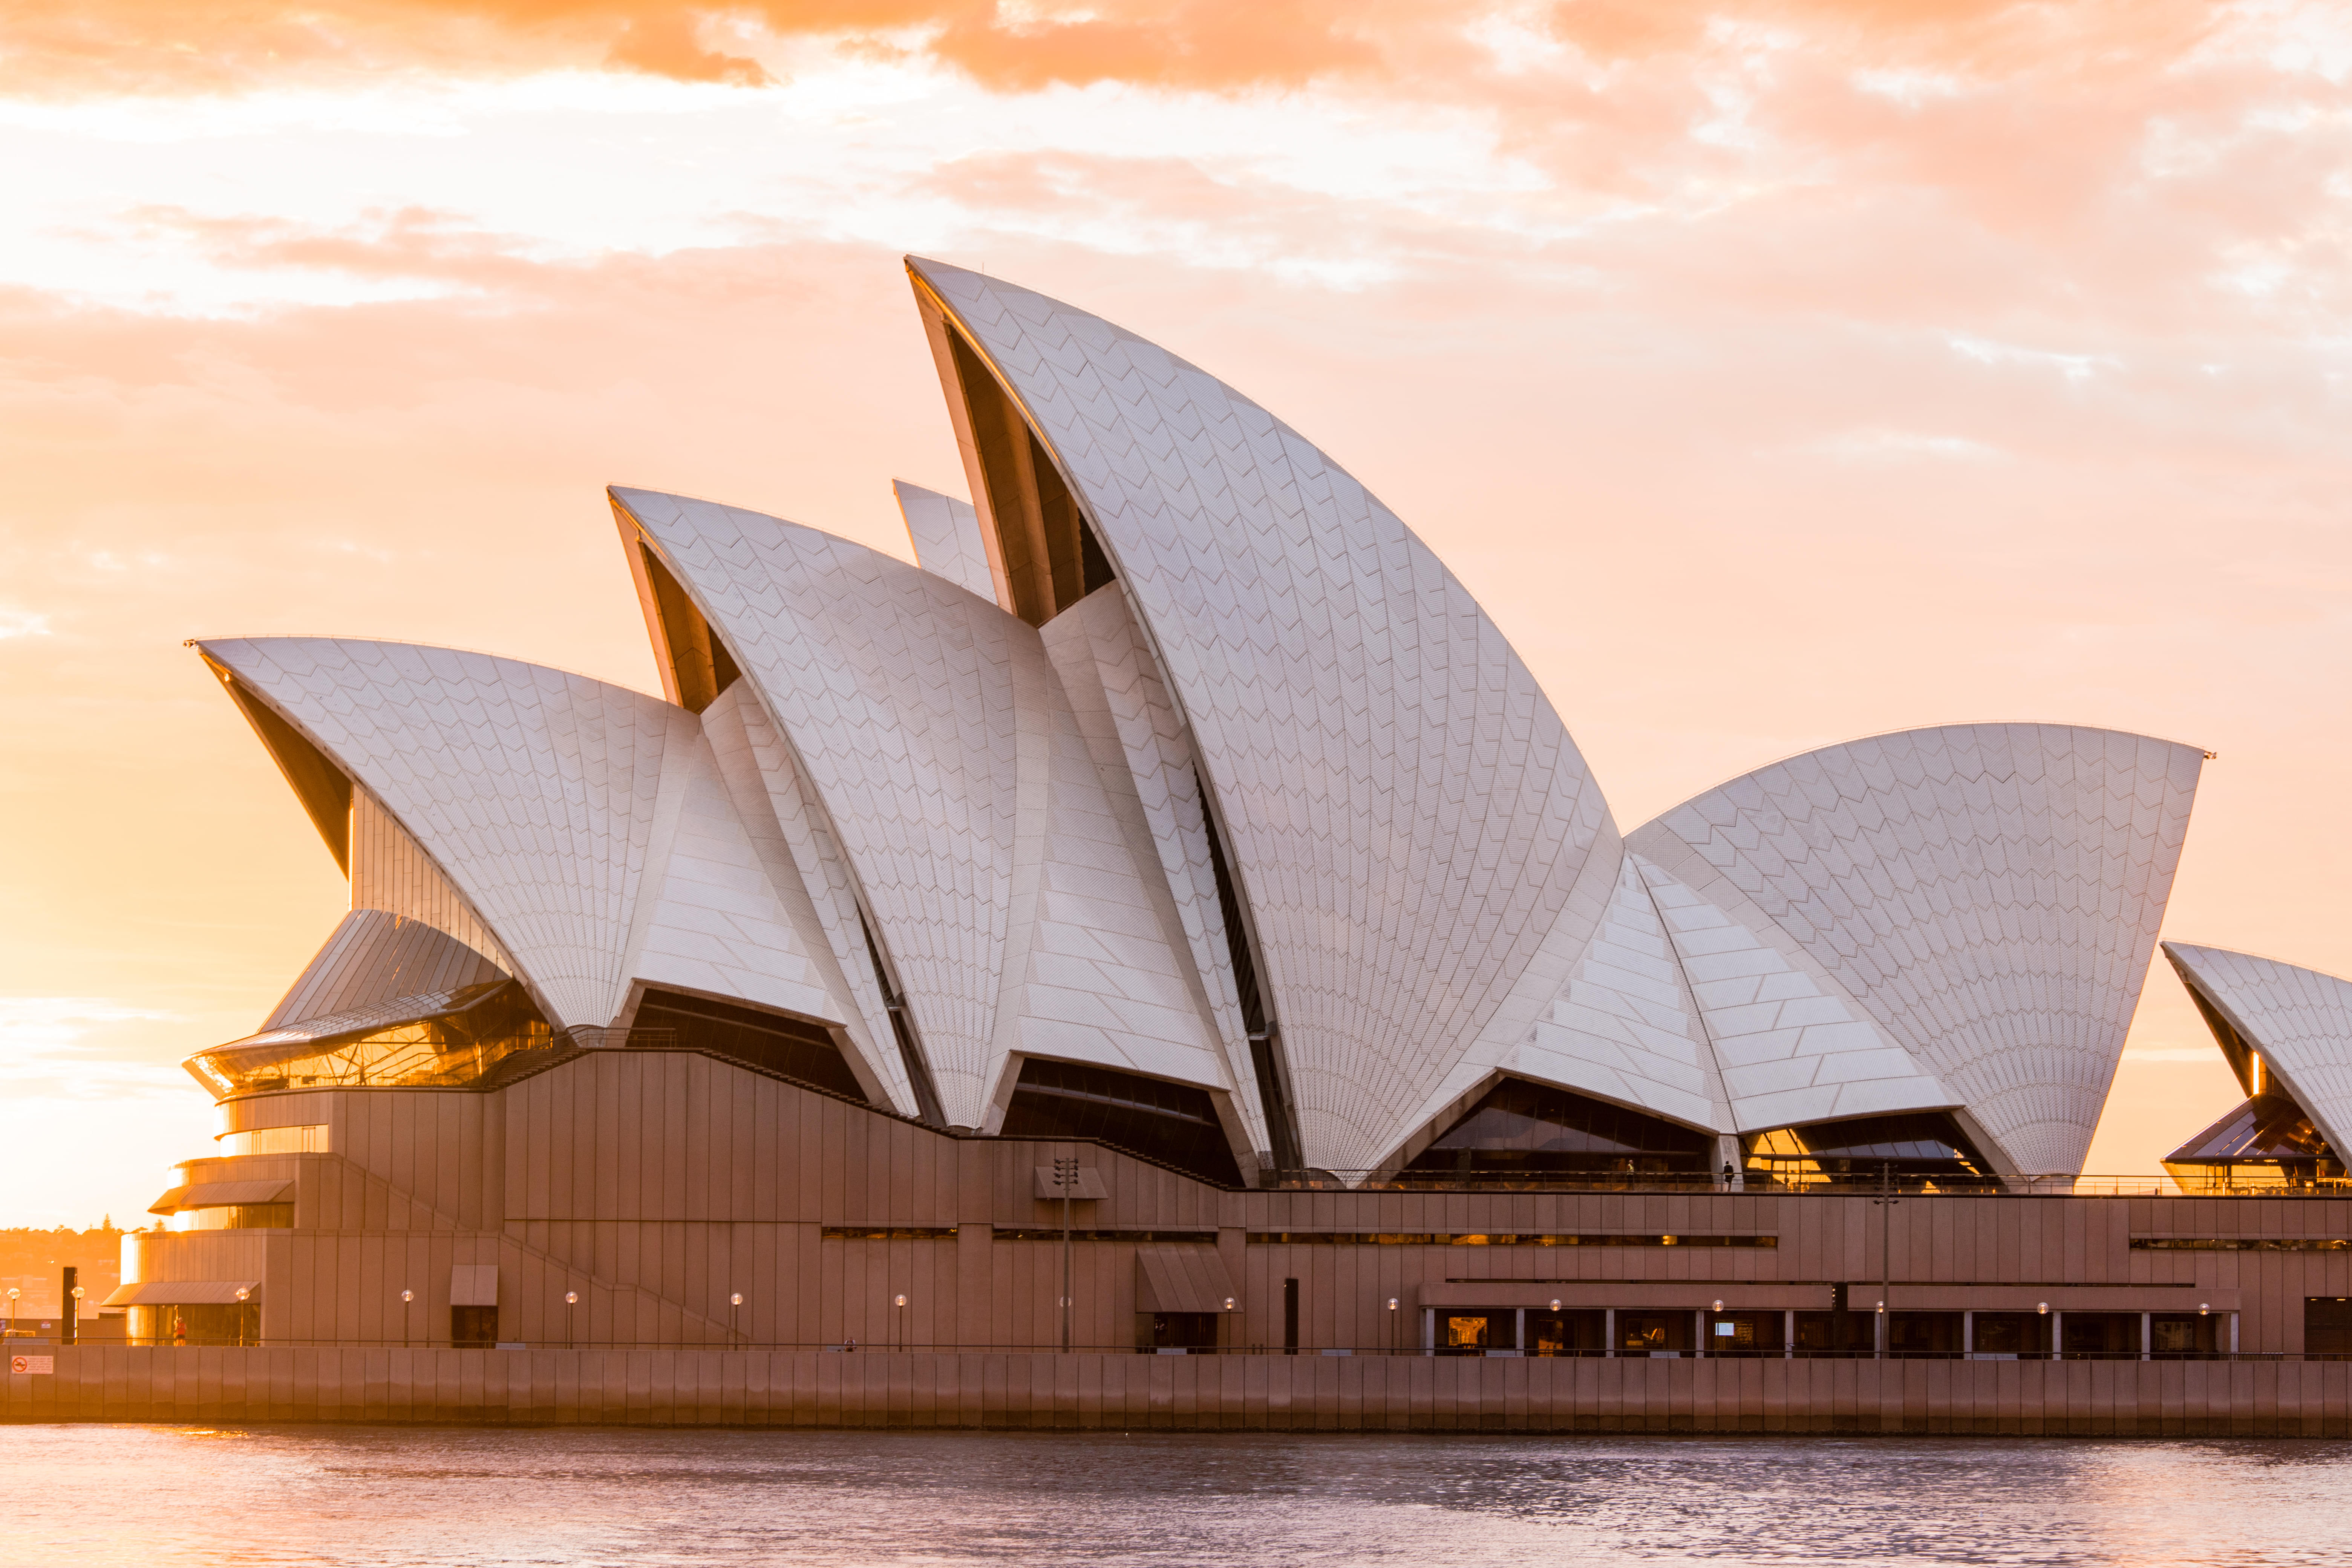 Embark on a guided tour to the renowned Sydney Opera House